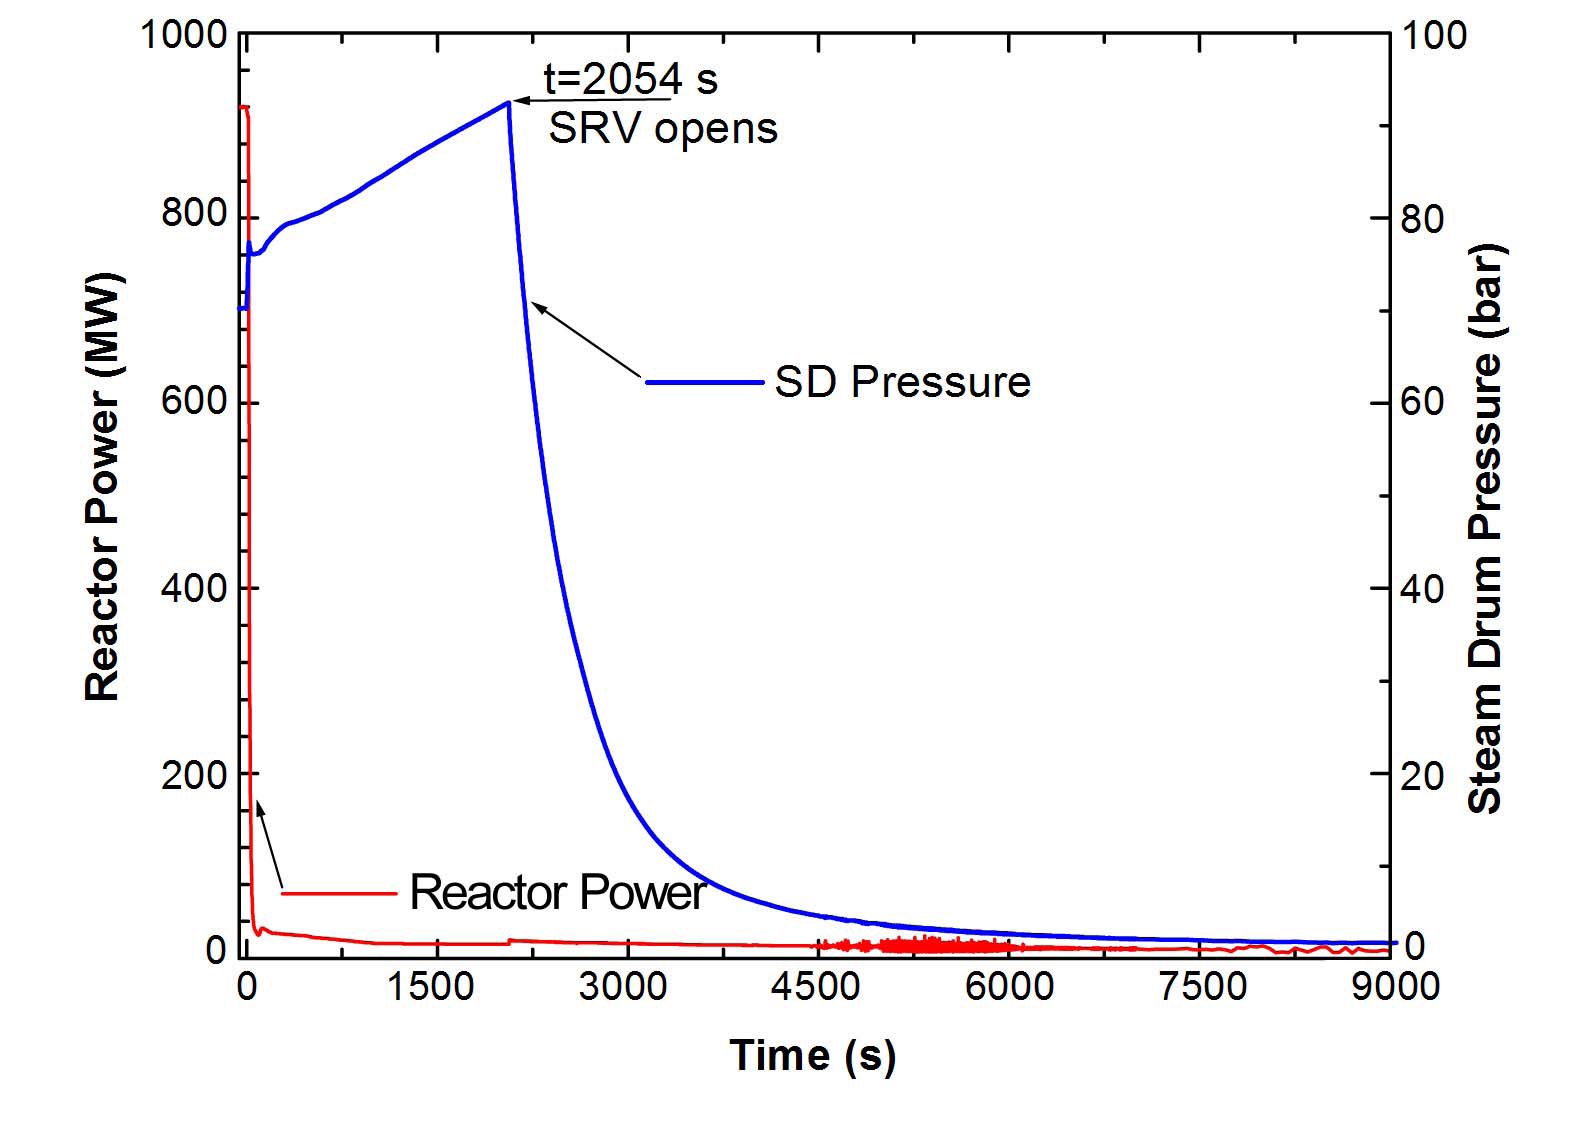 SD Pressure and Reactor Power for TMI-like Accident